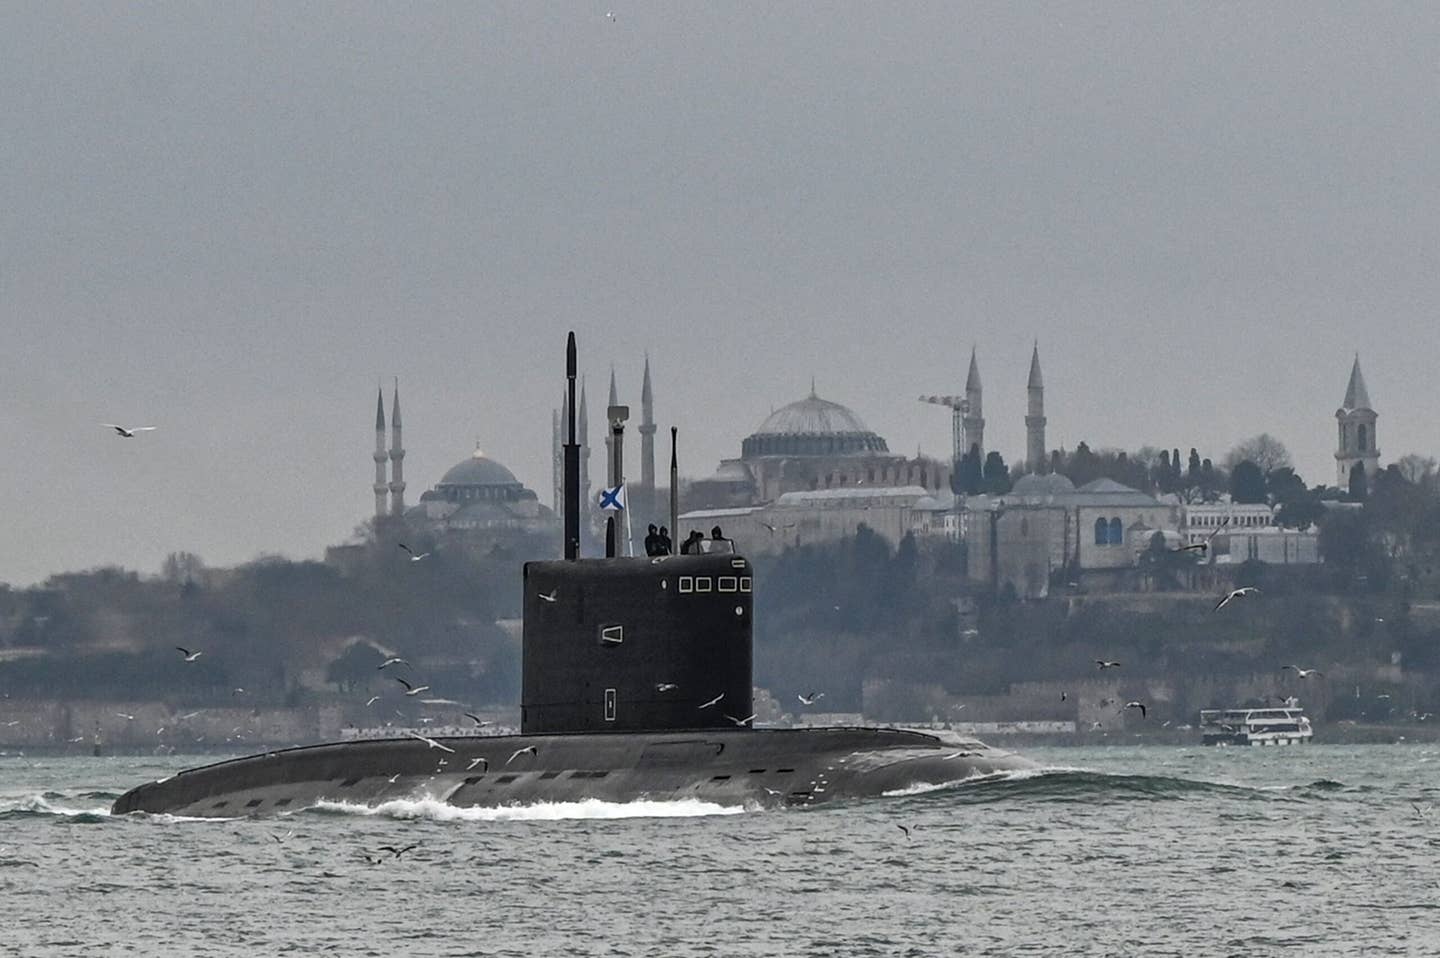 Seen in happier times, the Russian Navy <em>Improved Kilo</em> class submarine <em>Rostov-on-Don</em> sails through the Bosphorus Strait on the way to the Black Sea, on February 13, 2022. <em>Photo by OZAN KOSE/AFP via Getty Images</em>